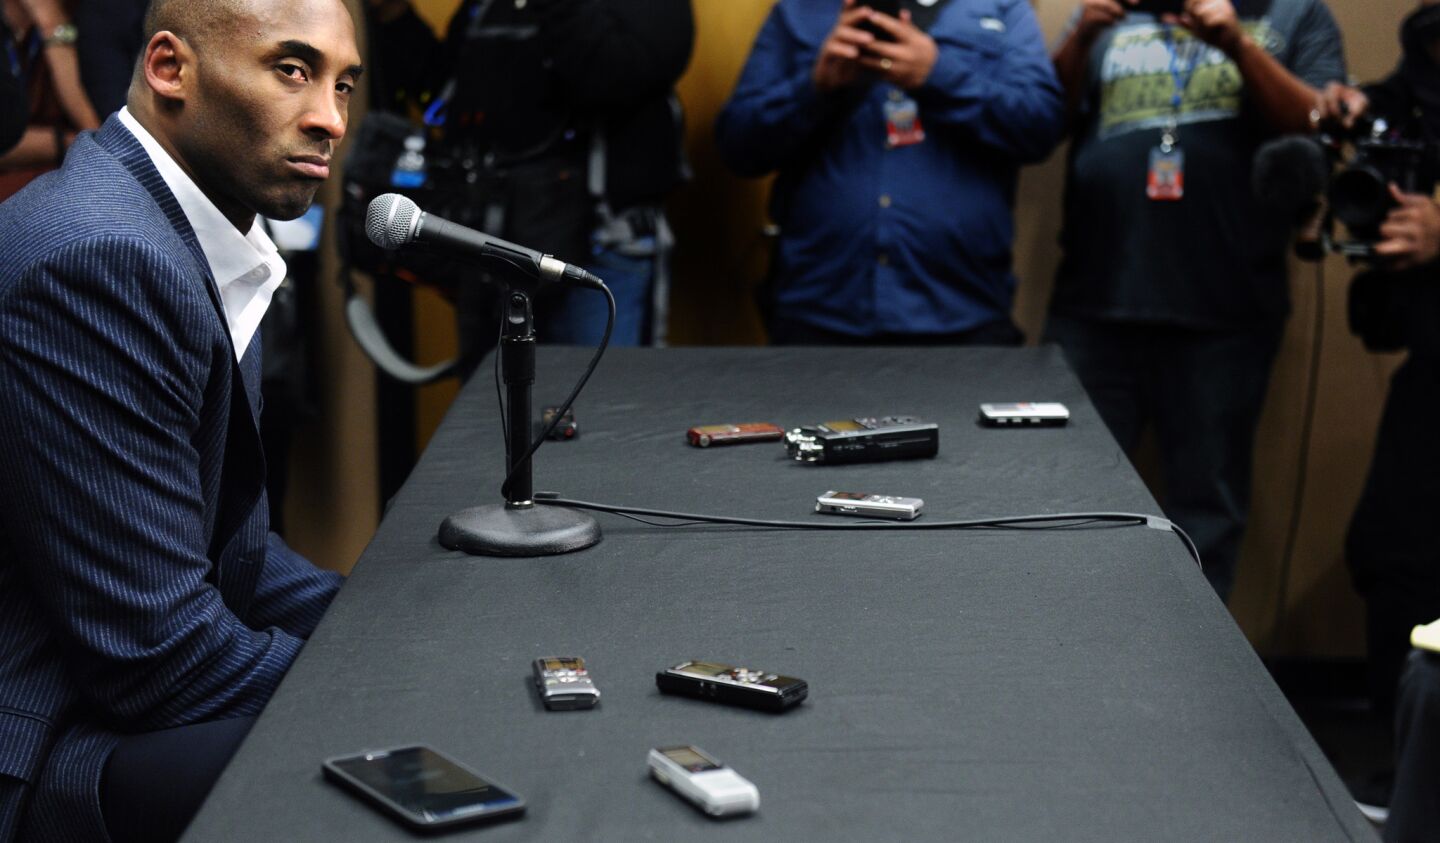 Kobe Bryant listens to a reporter askhim if he will "shut it down" because of his injured right shoulder during a news conference in Denver on March 2, 2016. Bryant only played in the first half of a 117-107 loss to the Nuggets.